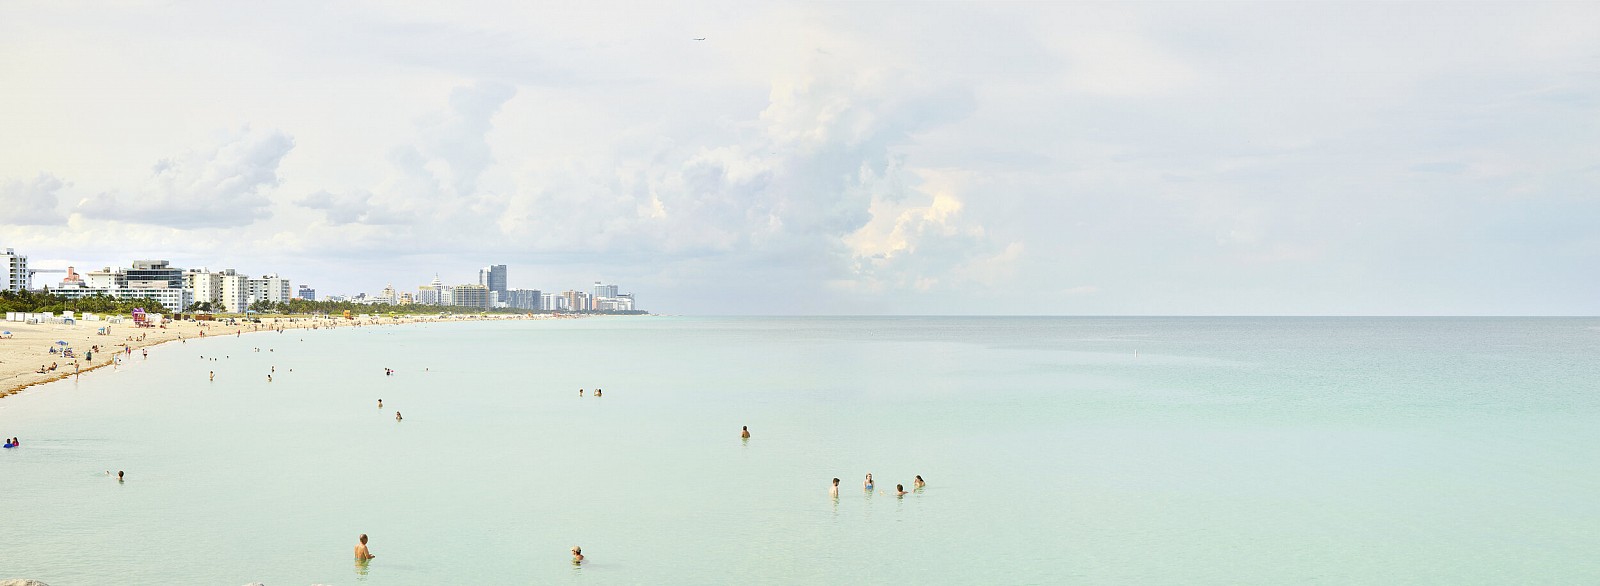 Nathan Coe, South Beach, 2020
archival pigment print, 36 x 96 in.